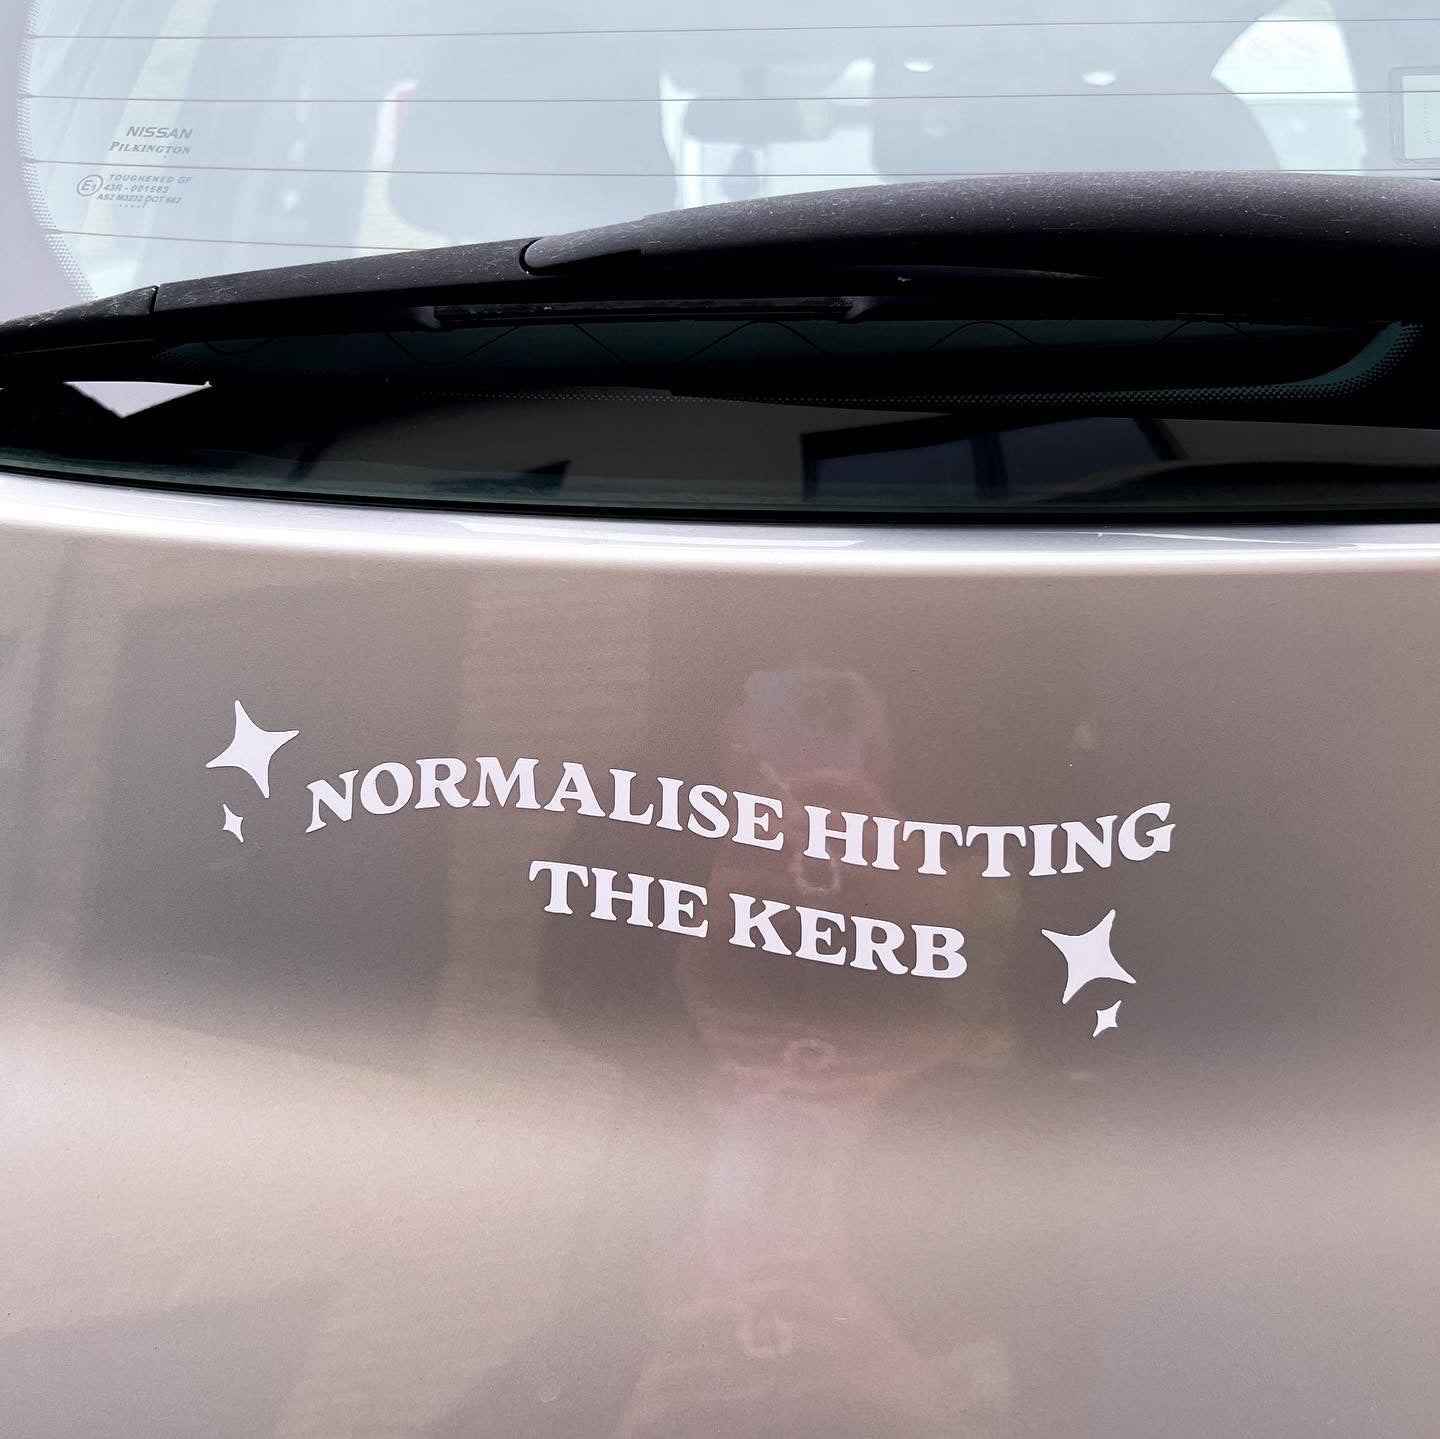 Normalise hitting the kerb decal